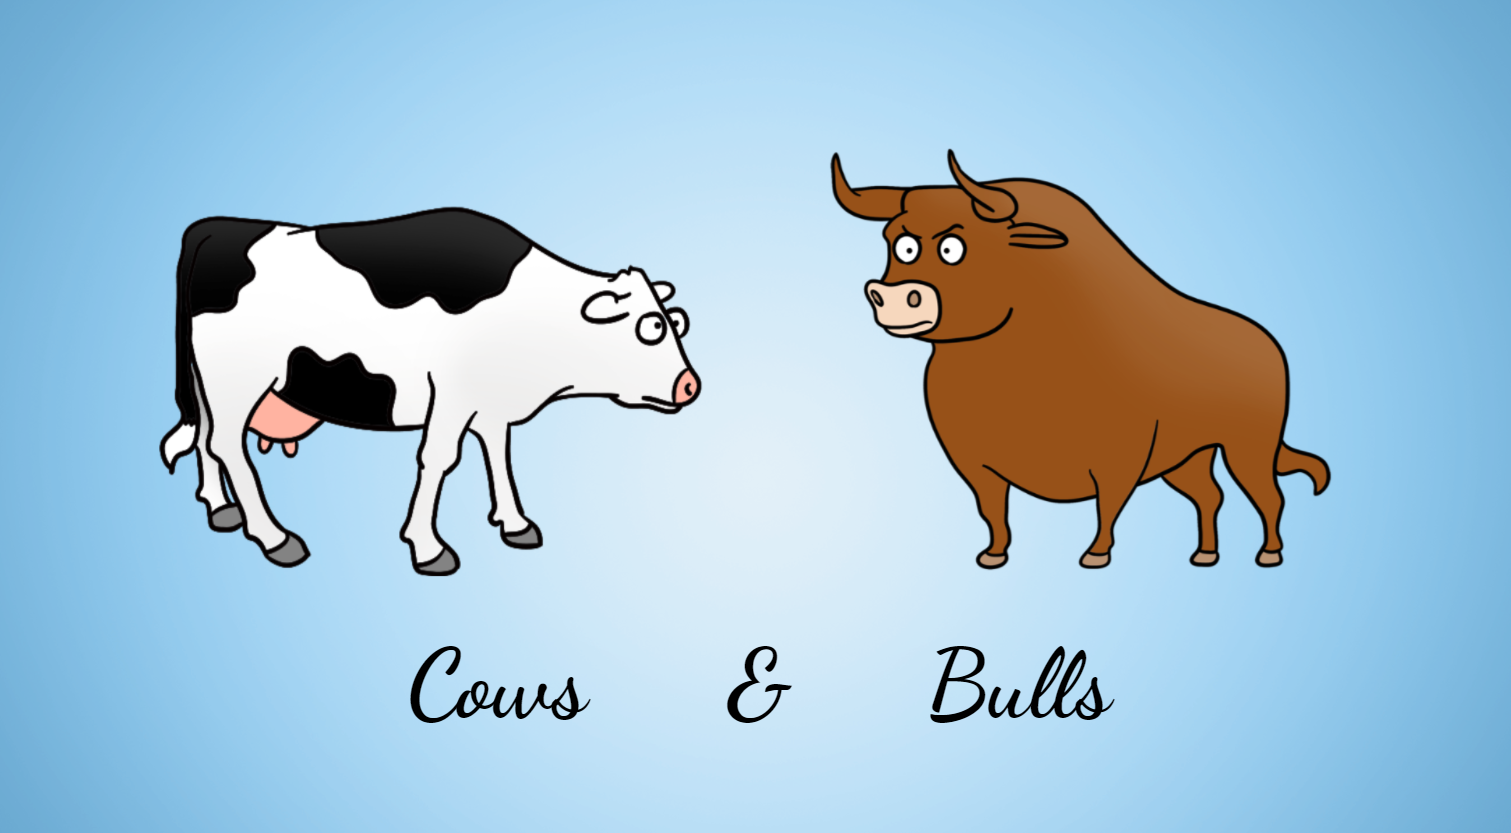 How to build Cows & Bulls – the numeric Wordle!